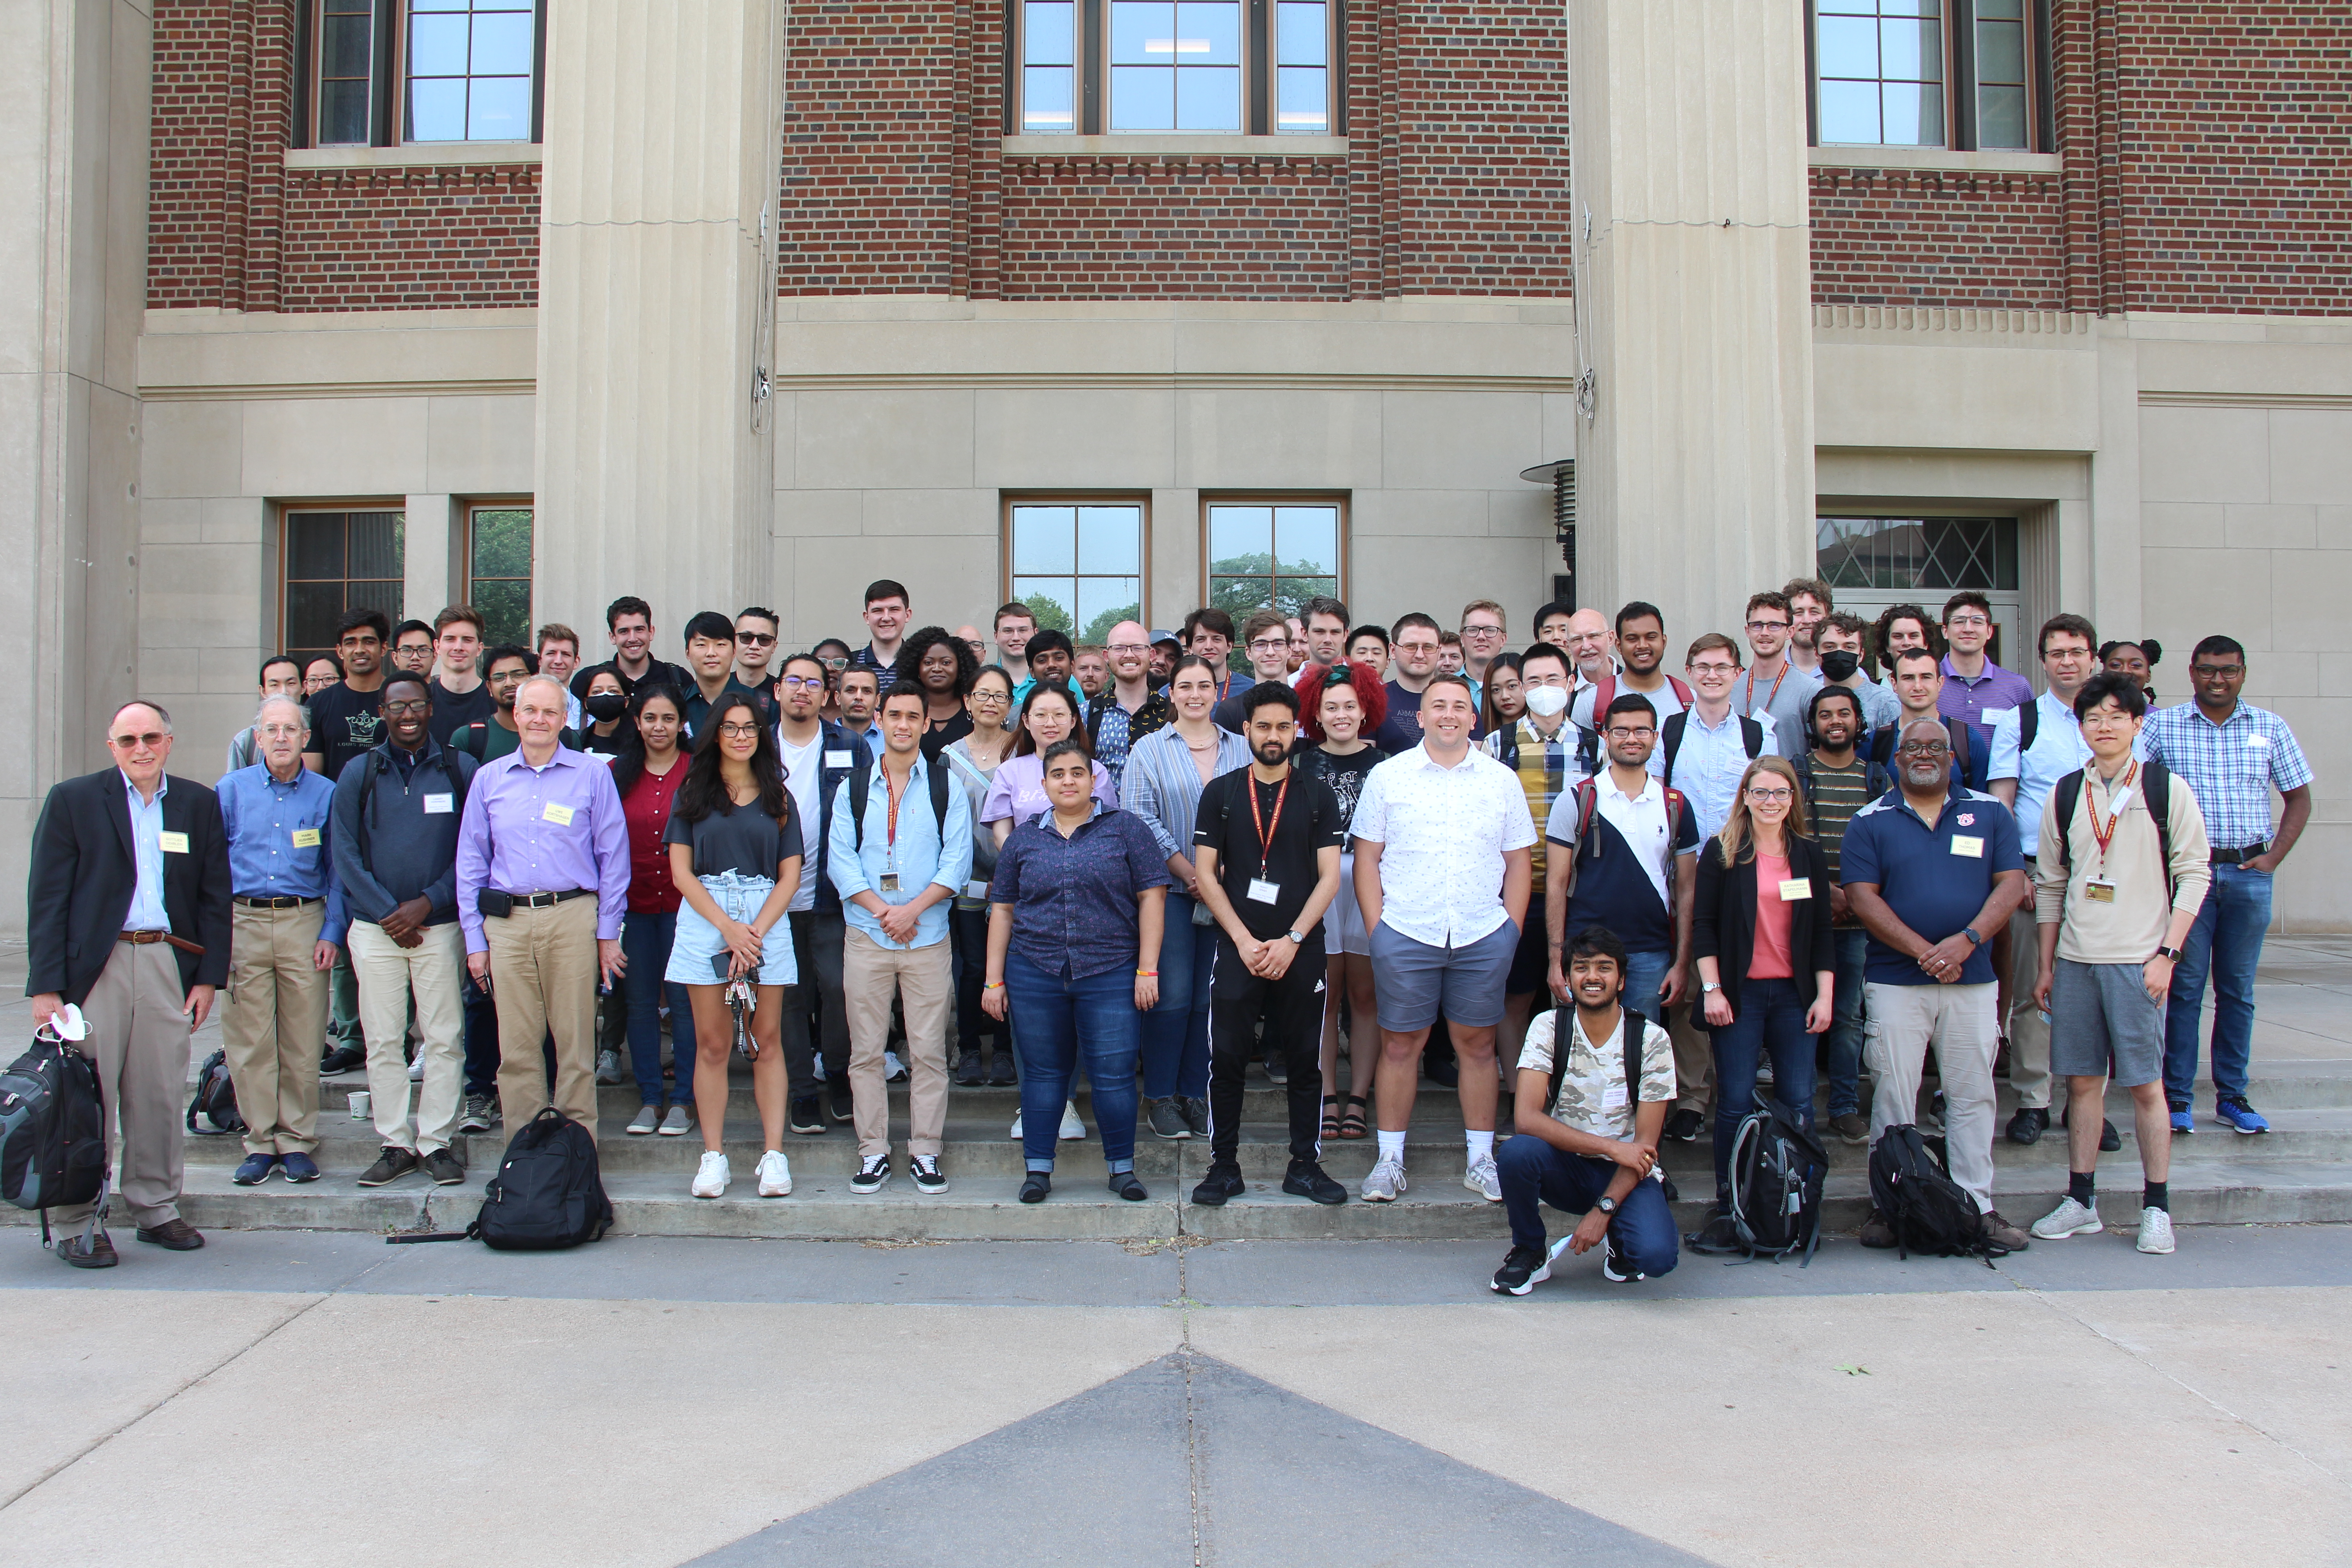 Participants in the 2022 Plasma Summer School gather on the steps of Coffman Union